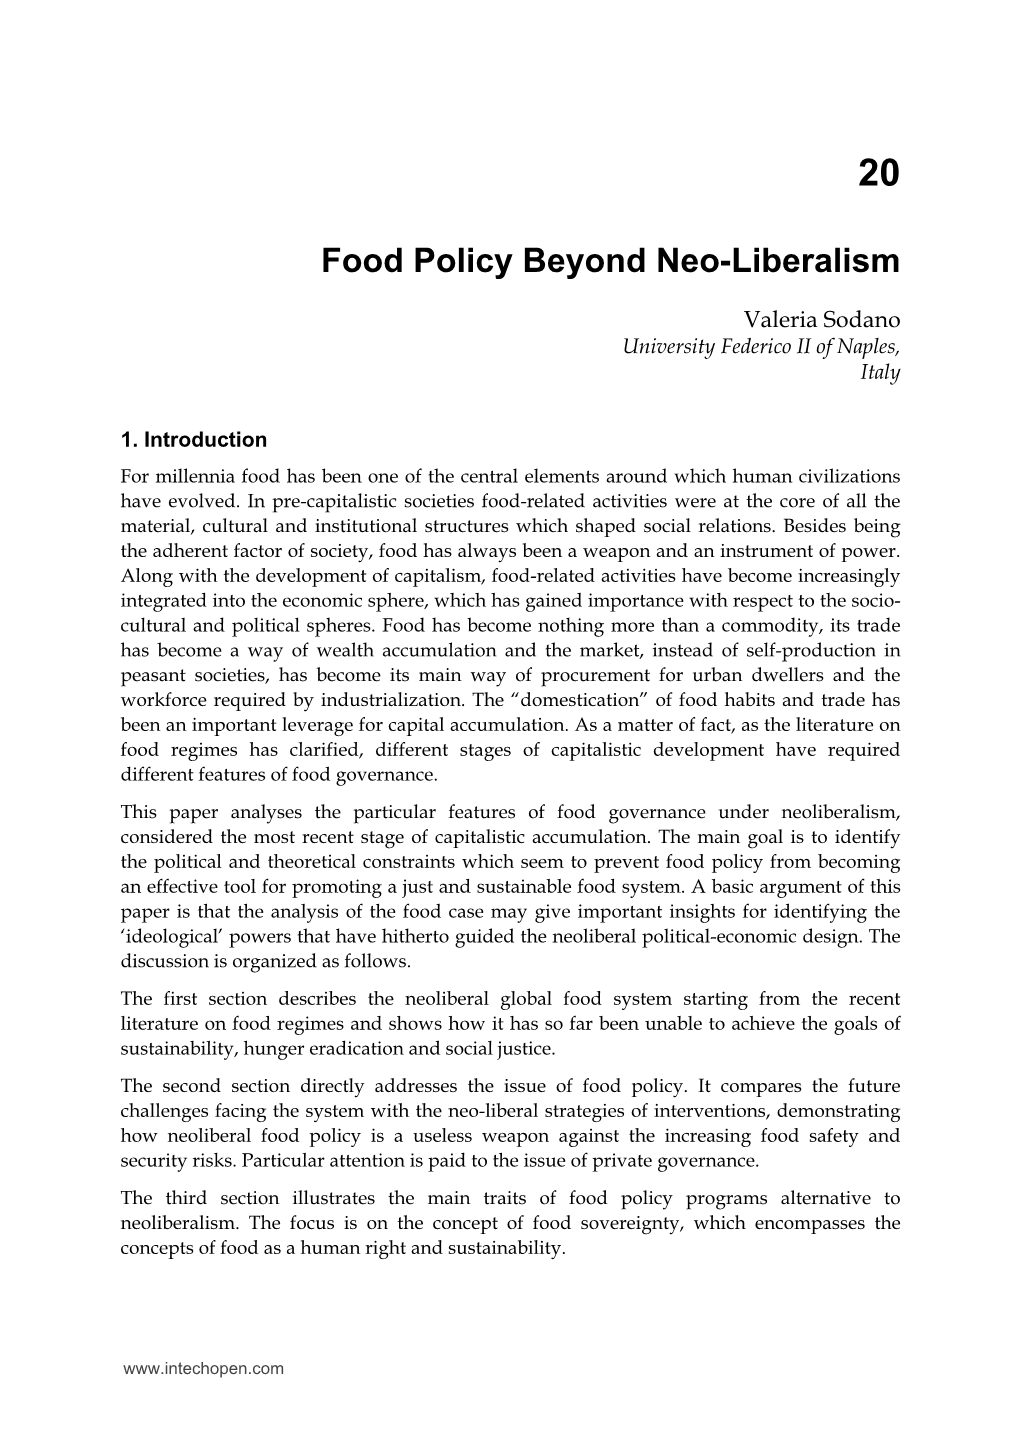 Food Policy Beyond Neo-Liberalism